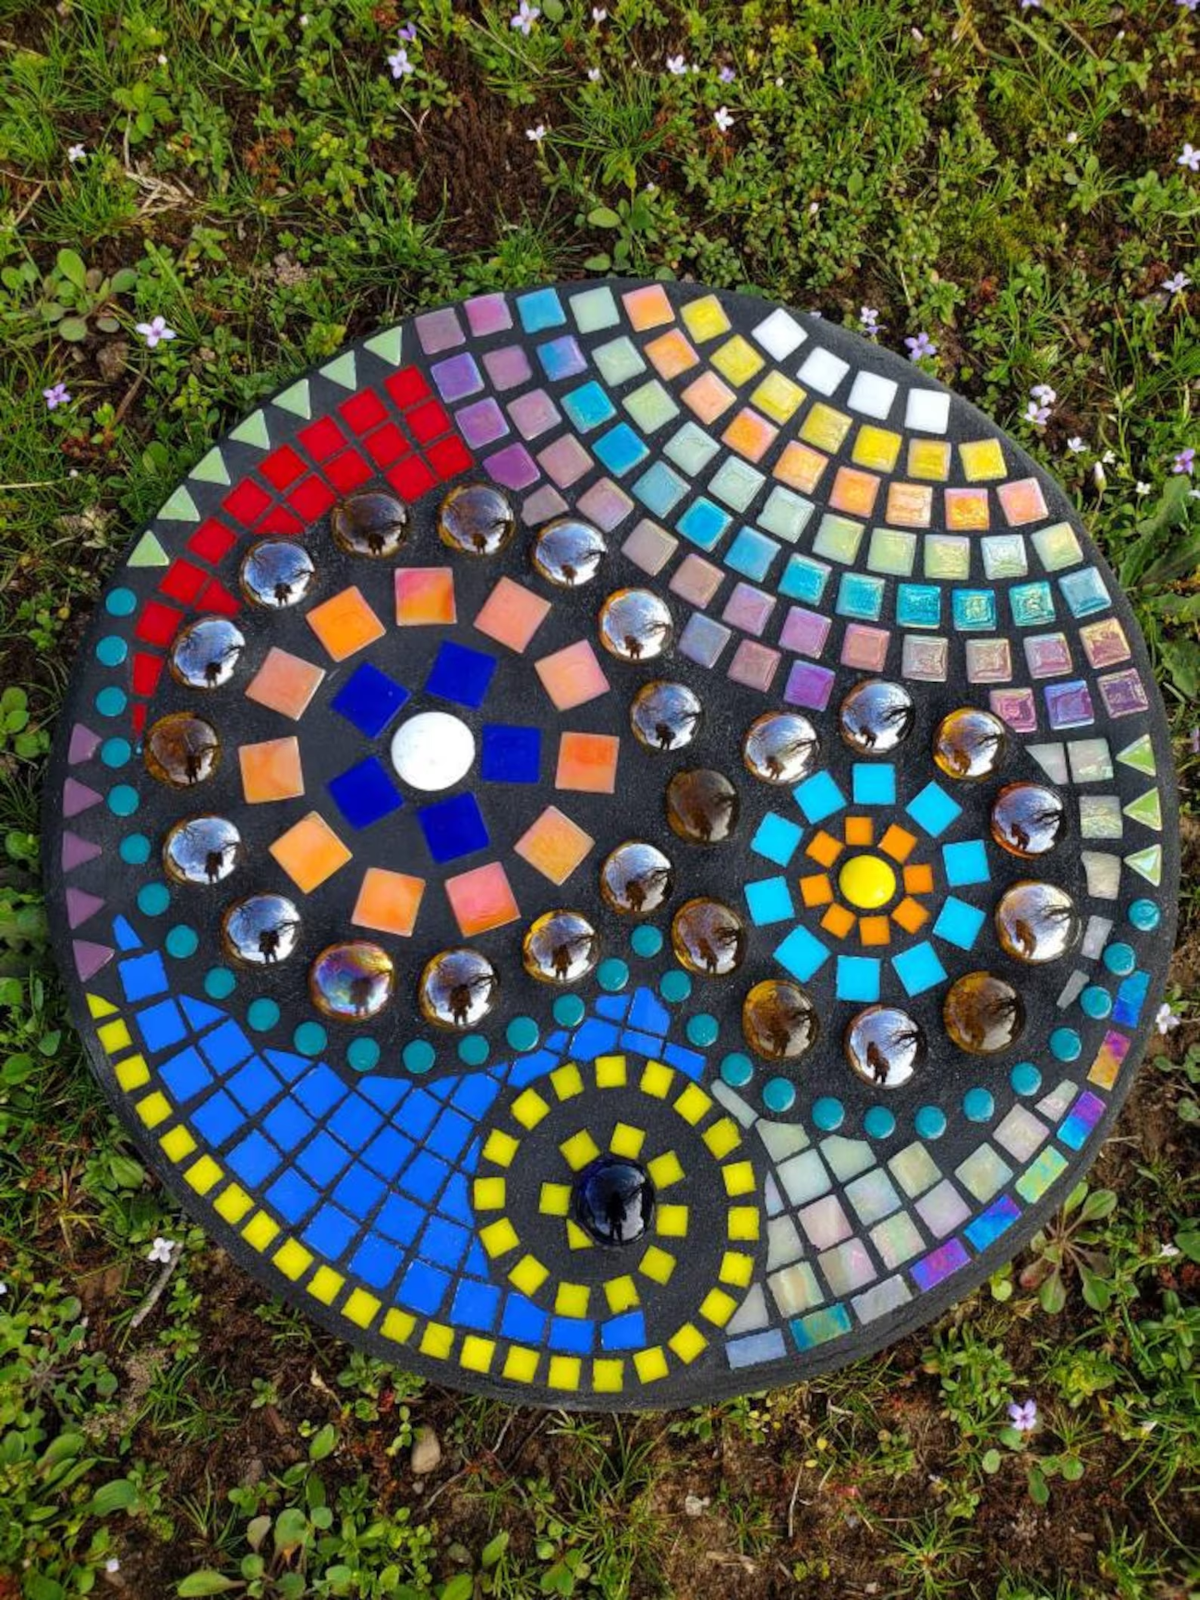 A round garden stepping stone with a colorful mosaic flower pattern.